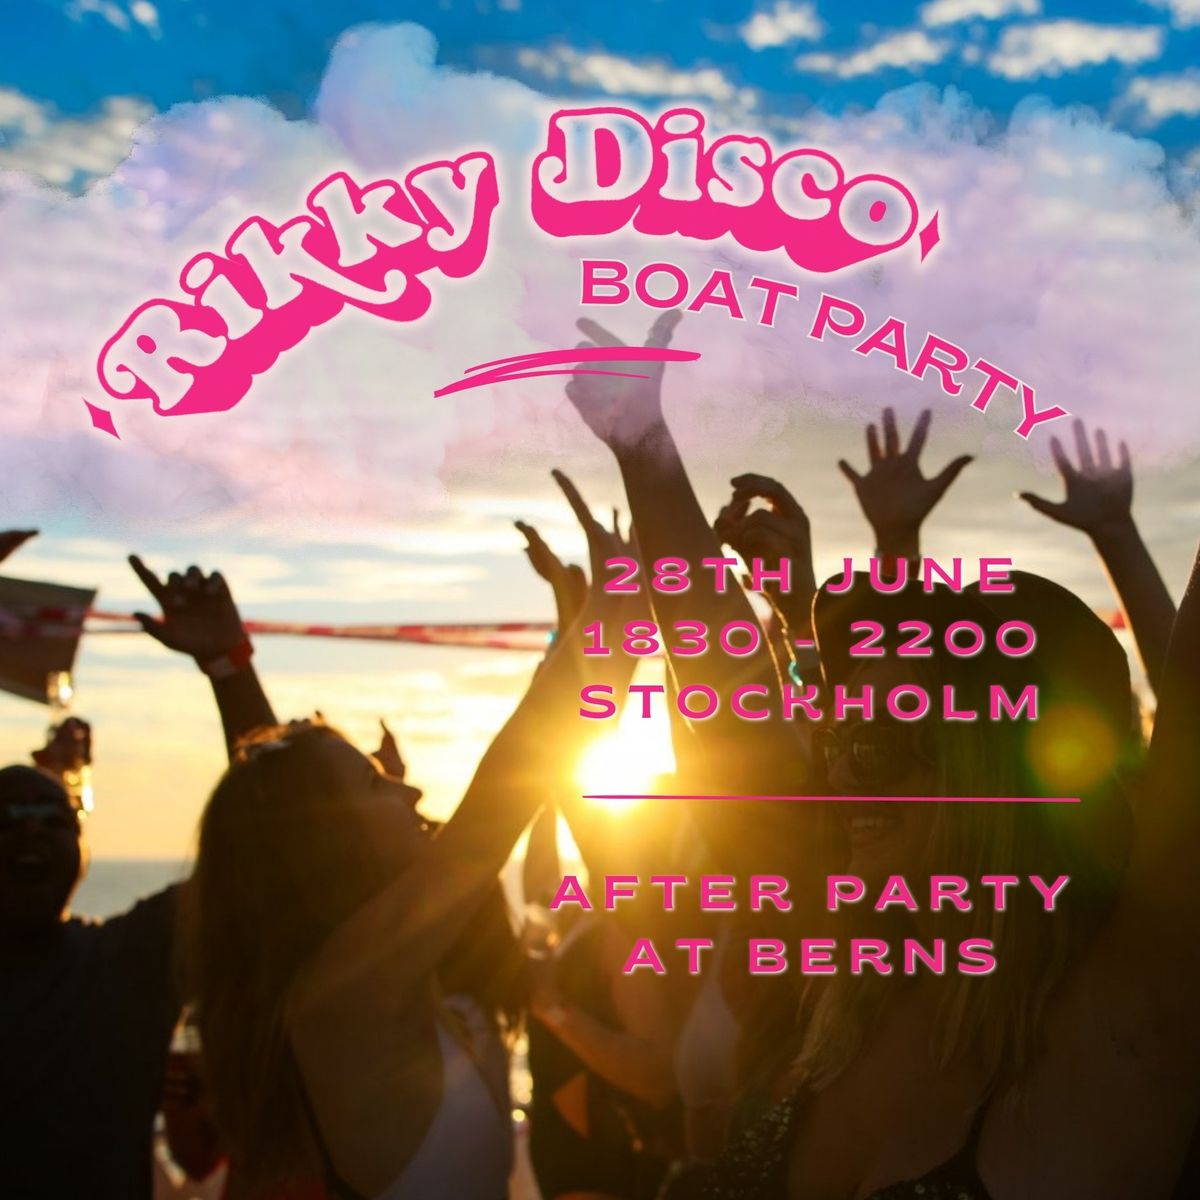 Rikky Disco - Boat Party!